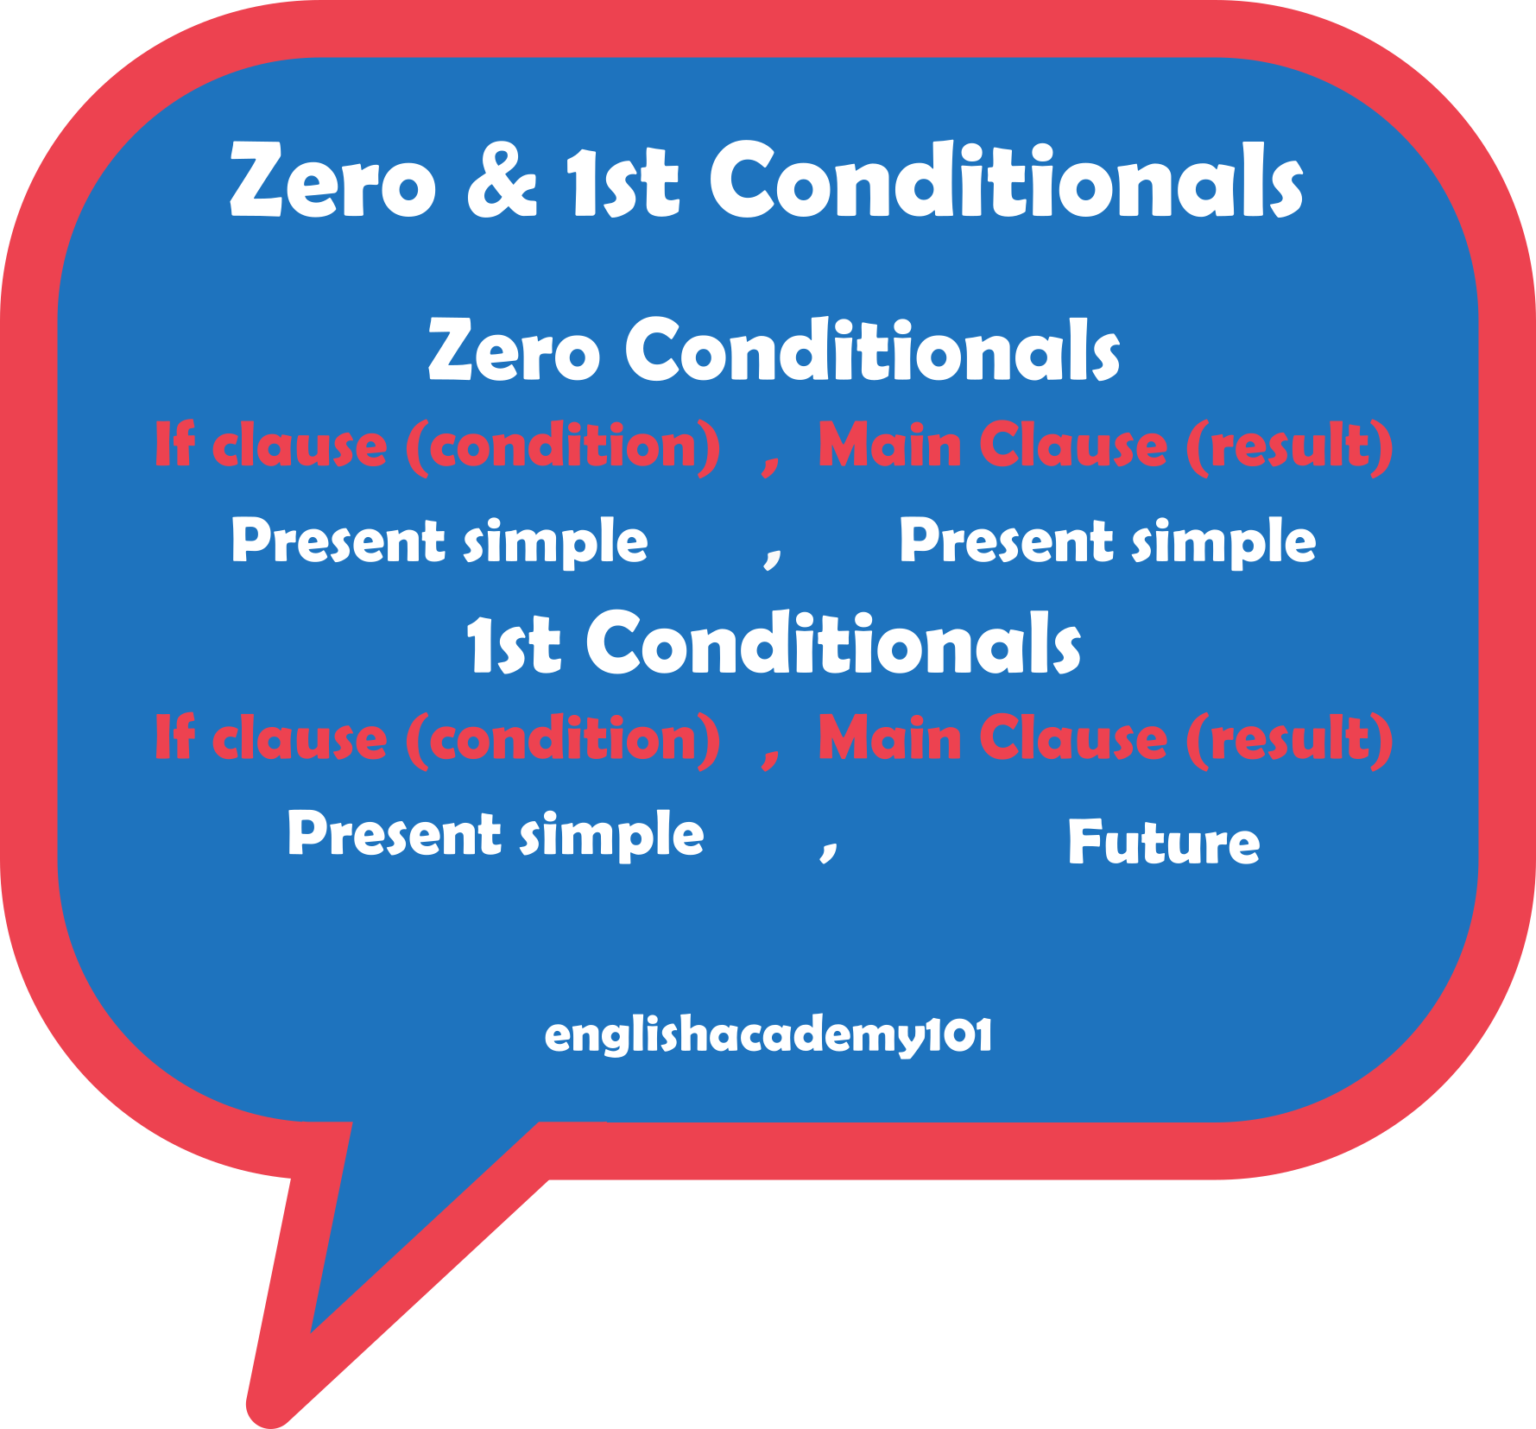 zero-and-1st-conditionals-in-english-englishacademy101